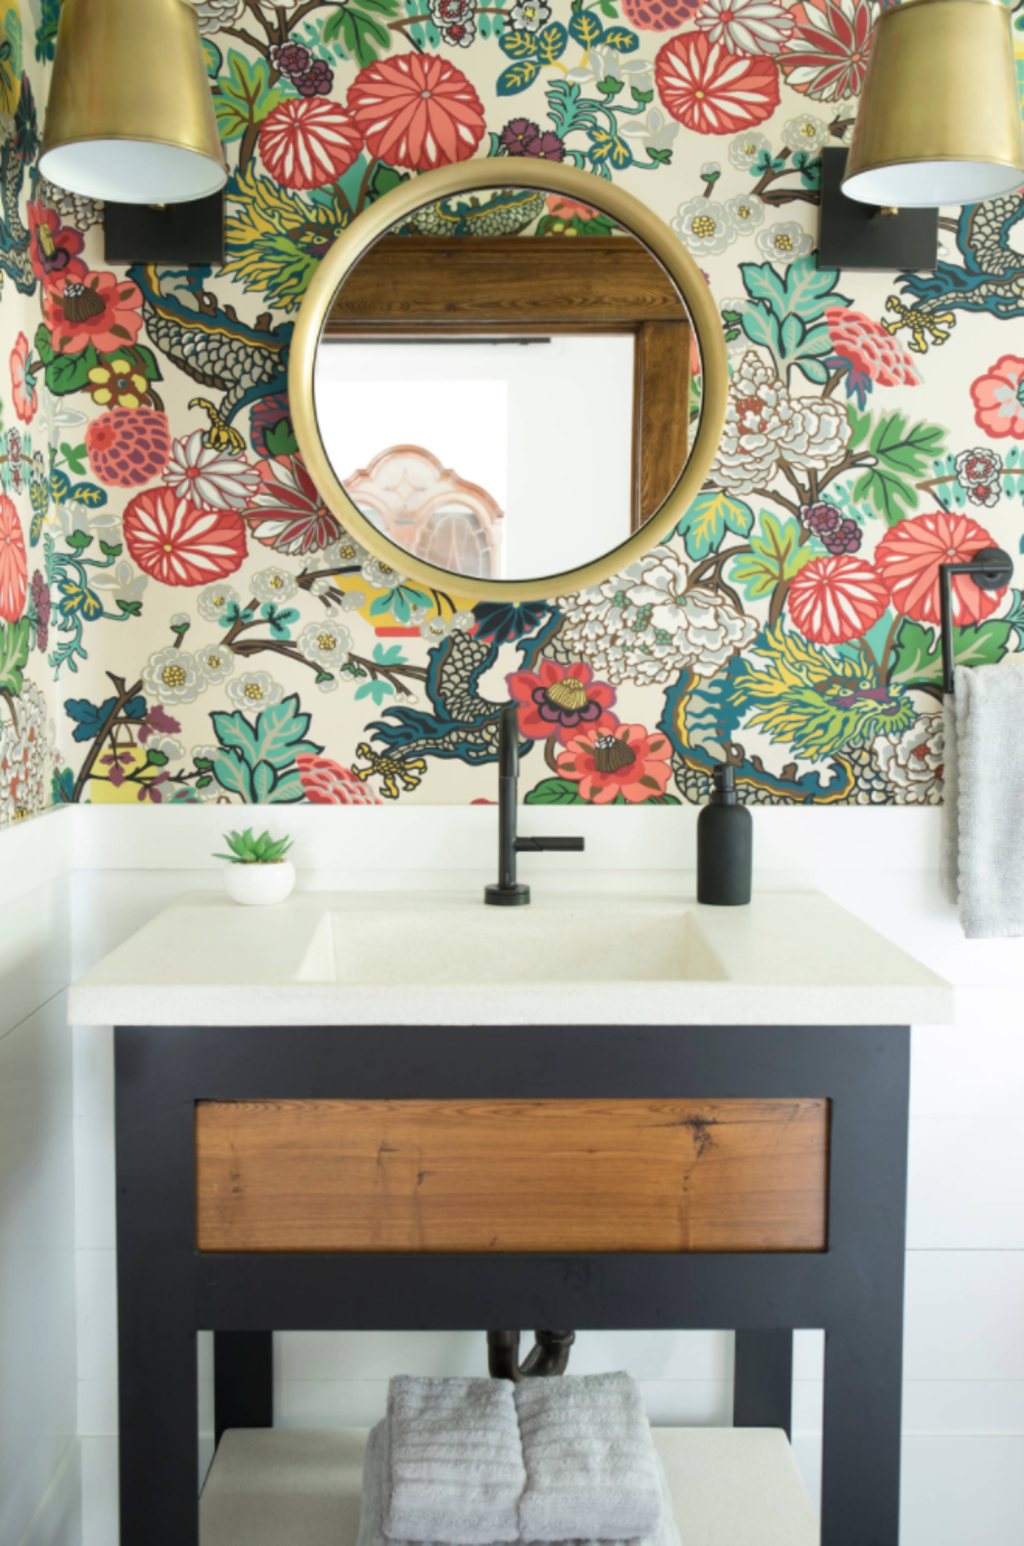 How To Choose A Bathroom Mirror You Ll Love, How Wide Should My Vanity Mirror Be